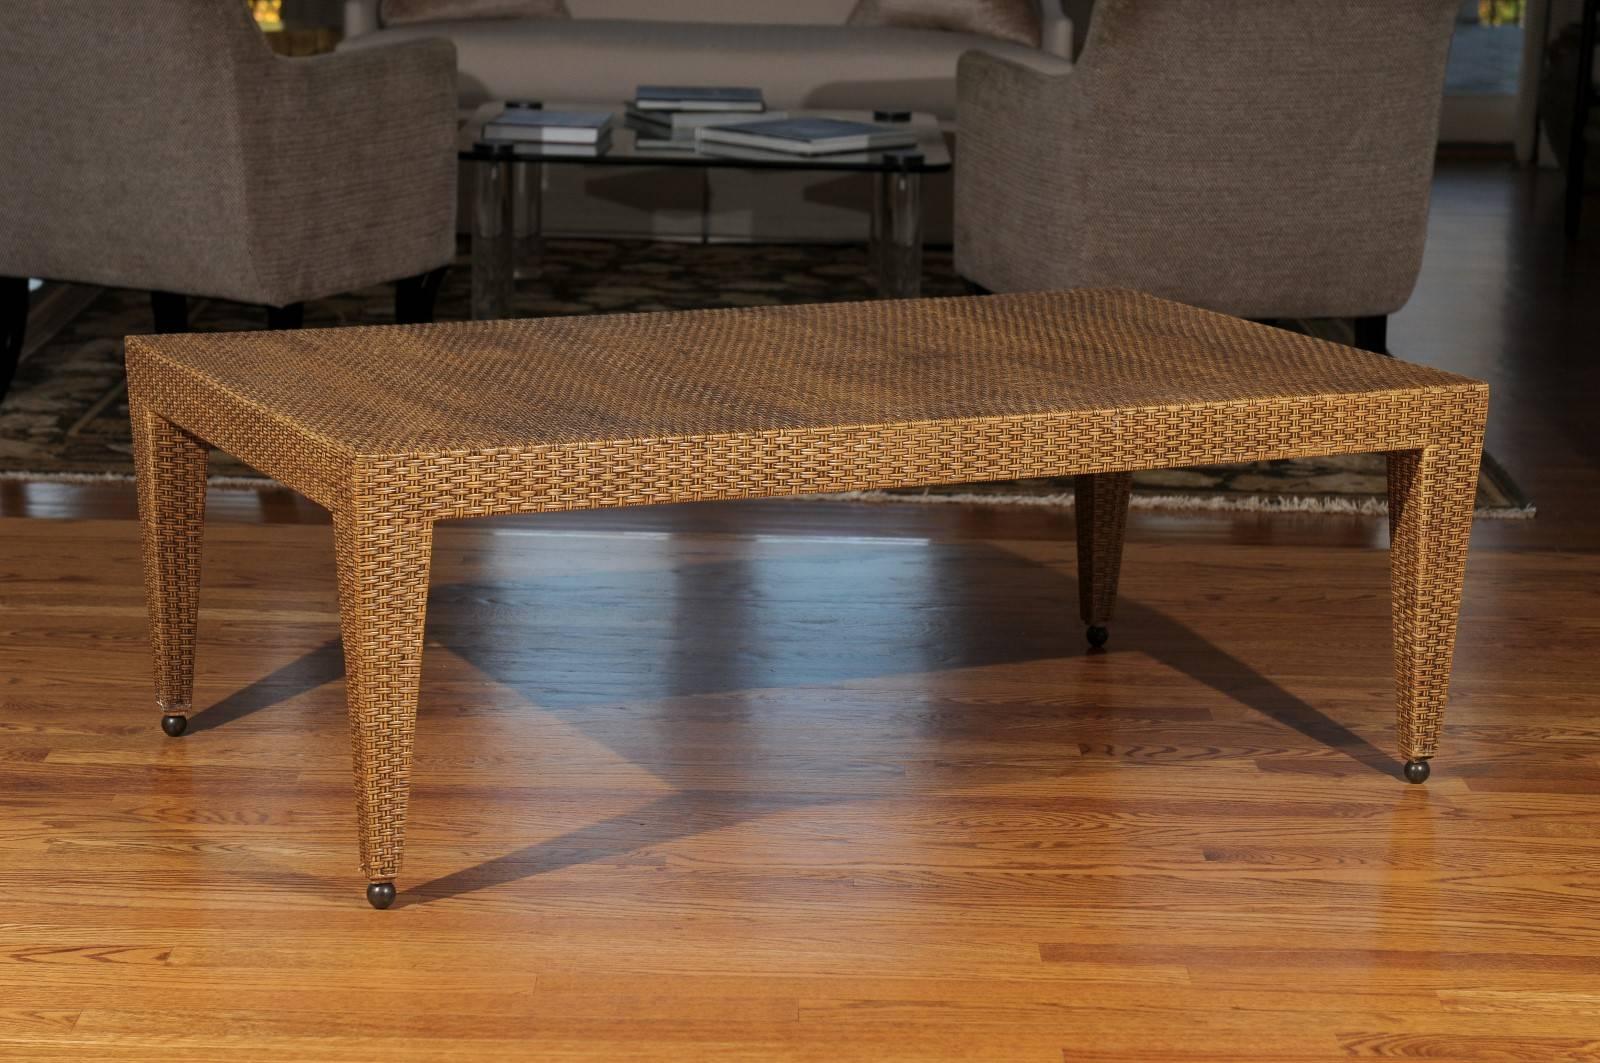 An exceptional vintage coffee table, circa 1985. Stout, expertly crafted hardwood form veneered in basketweave raffia-aged to absolute perfection! Solid nickel ball detail accent the legs. Fabulous warmth and texture. Sturdy enough to support